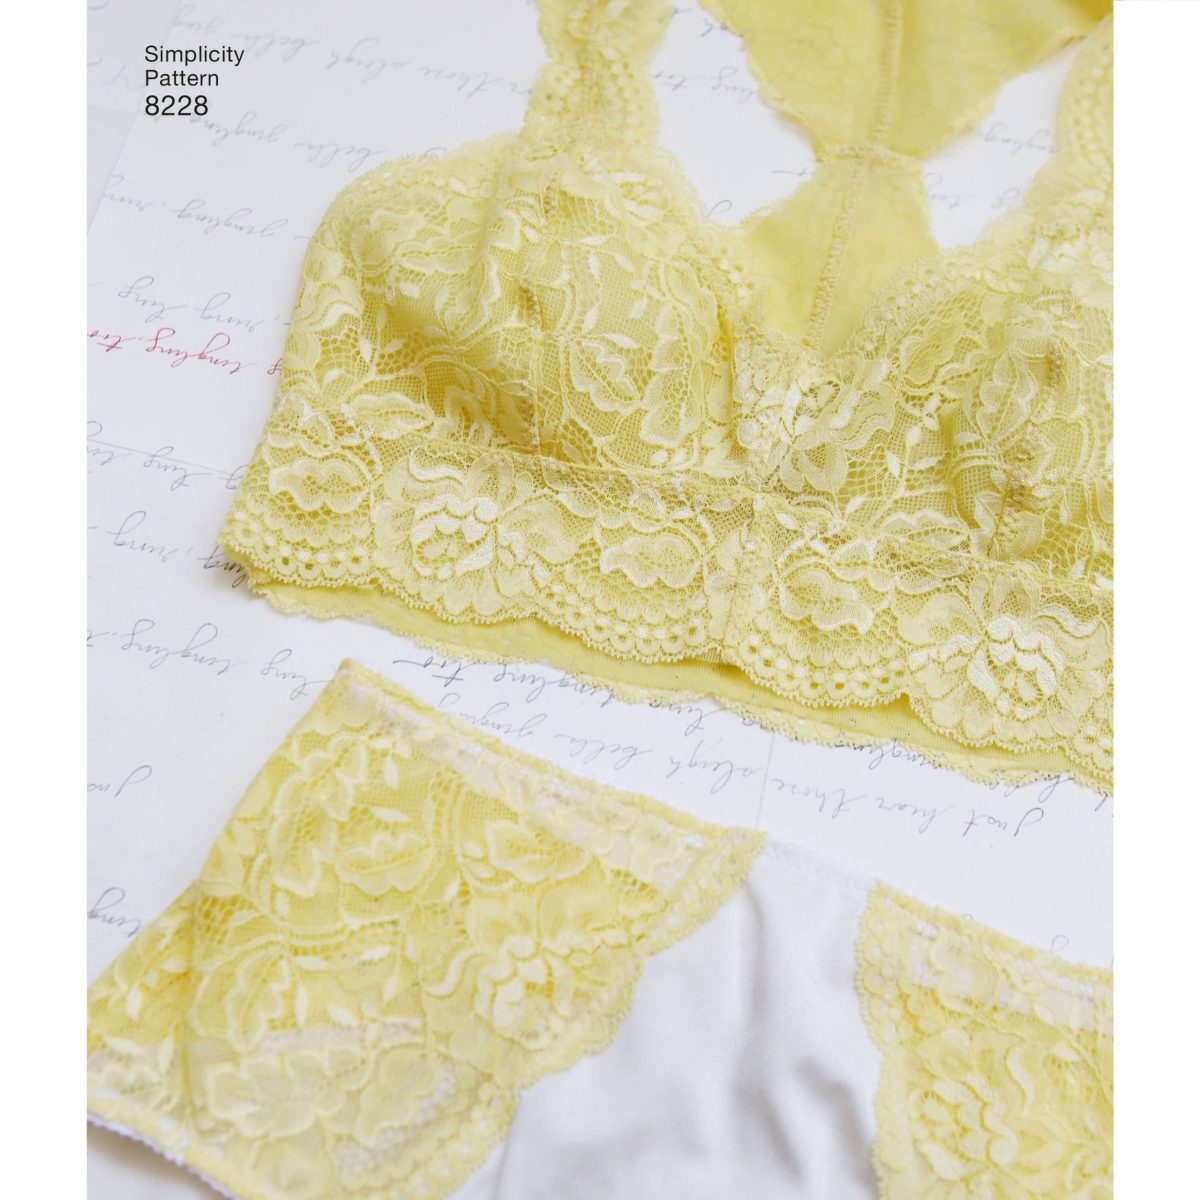 Simplicity Pattern 8228 Misses' Soft Cup Bras and Panties